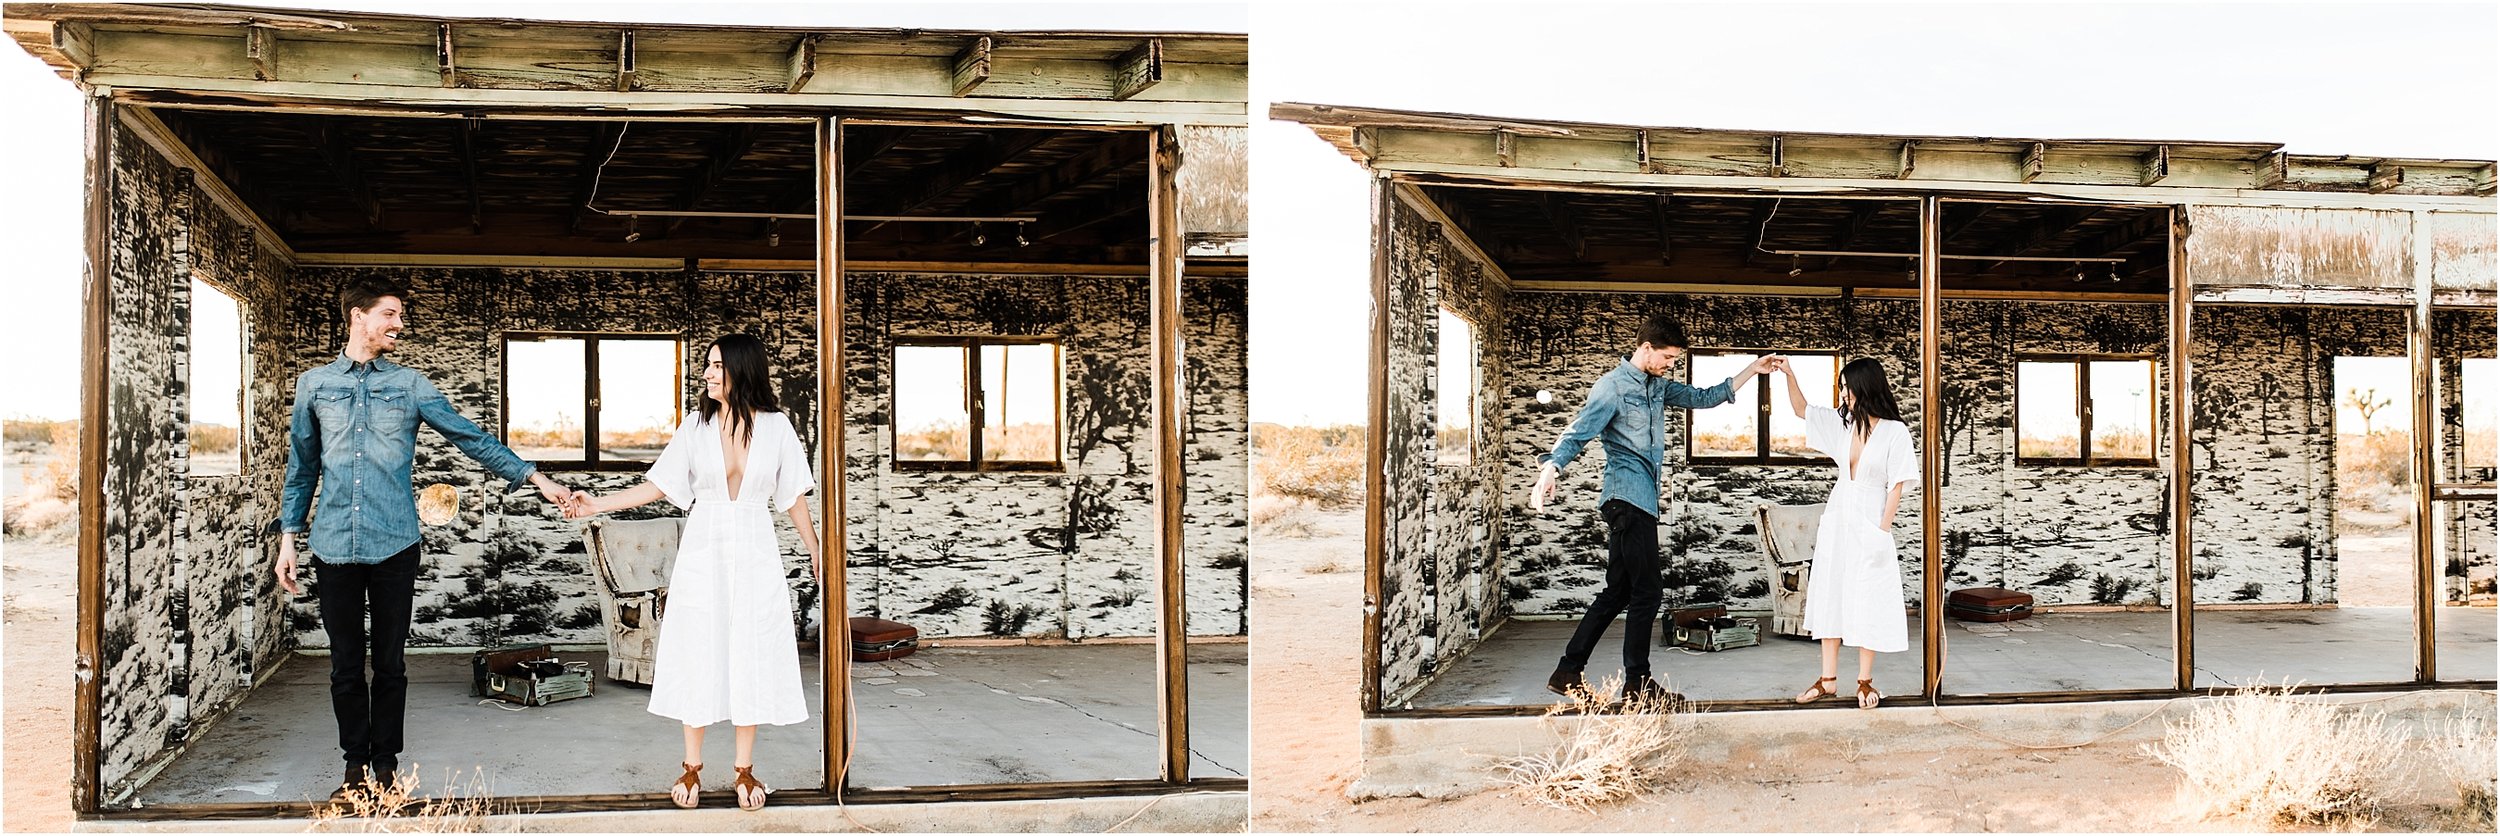  They saw this suuuuper cool abandoned house with Joshua Tree wallpaper and some old furniture and stuff inside. SO COOL! Of course we had to stop by! 